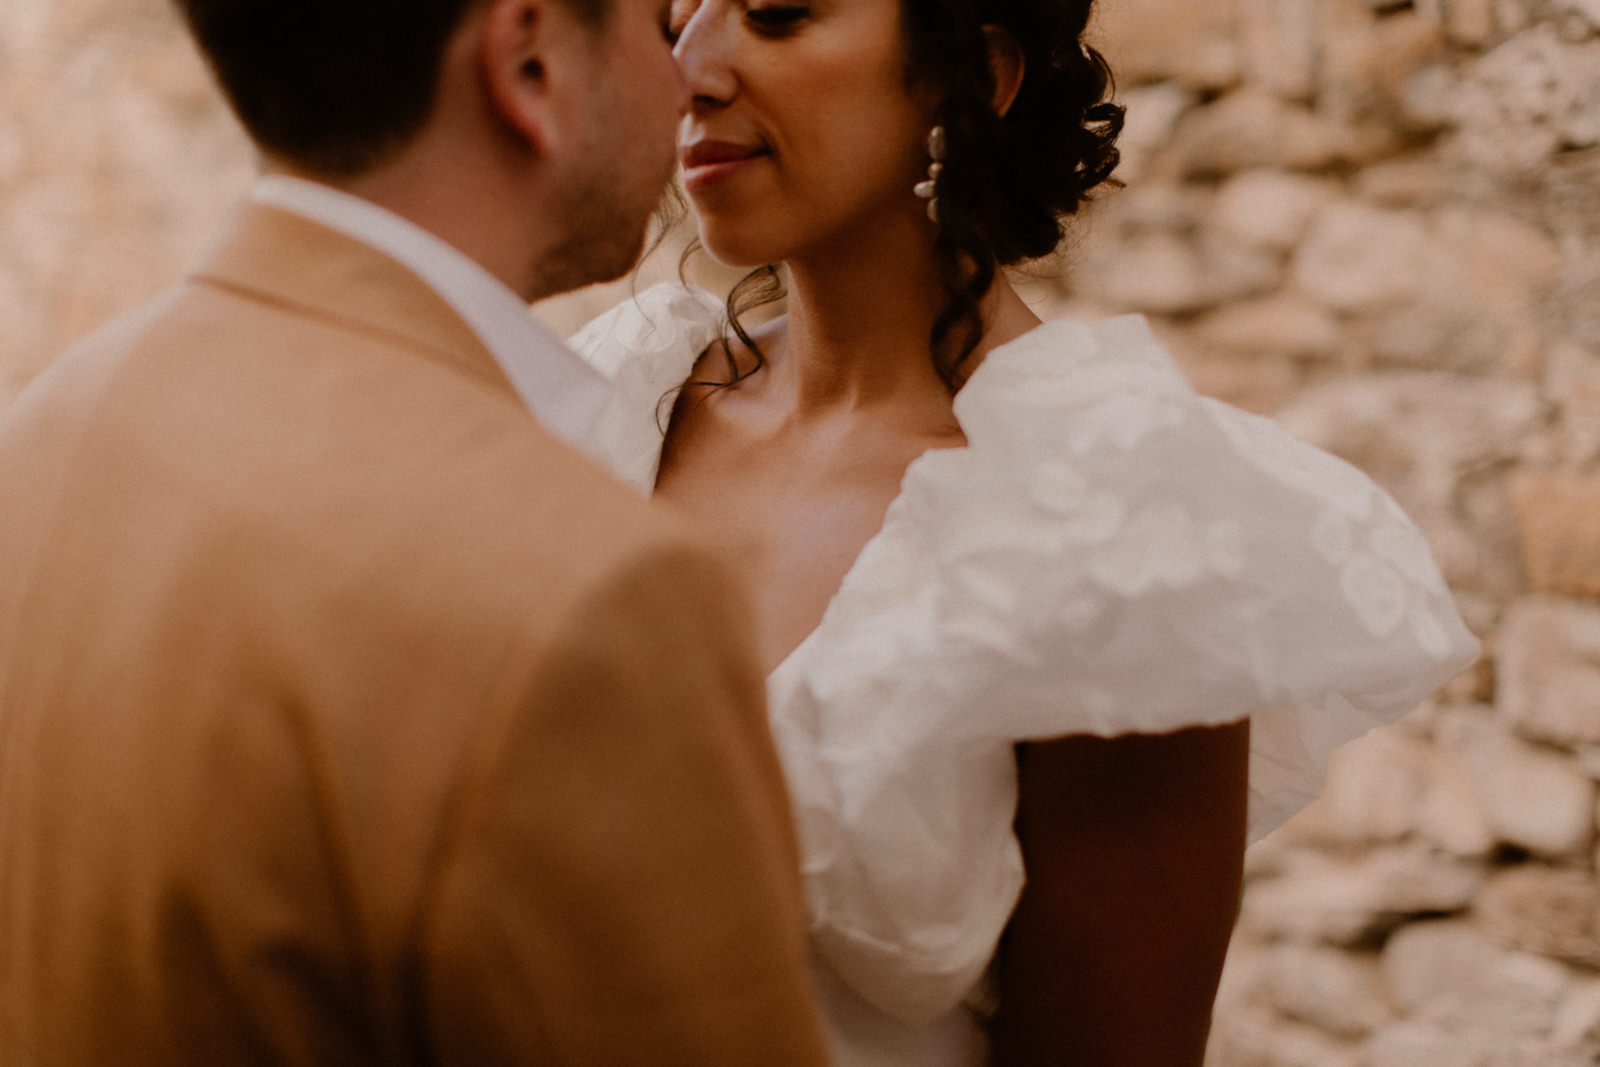 wedding photographer in Provence